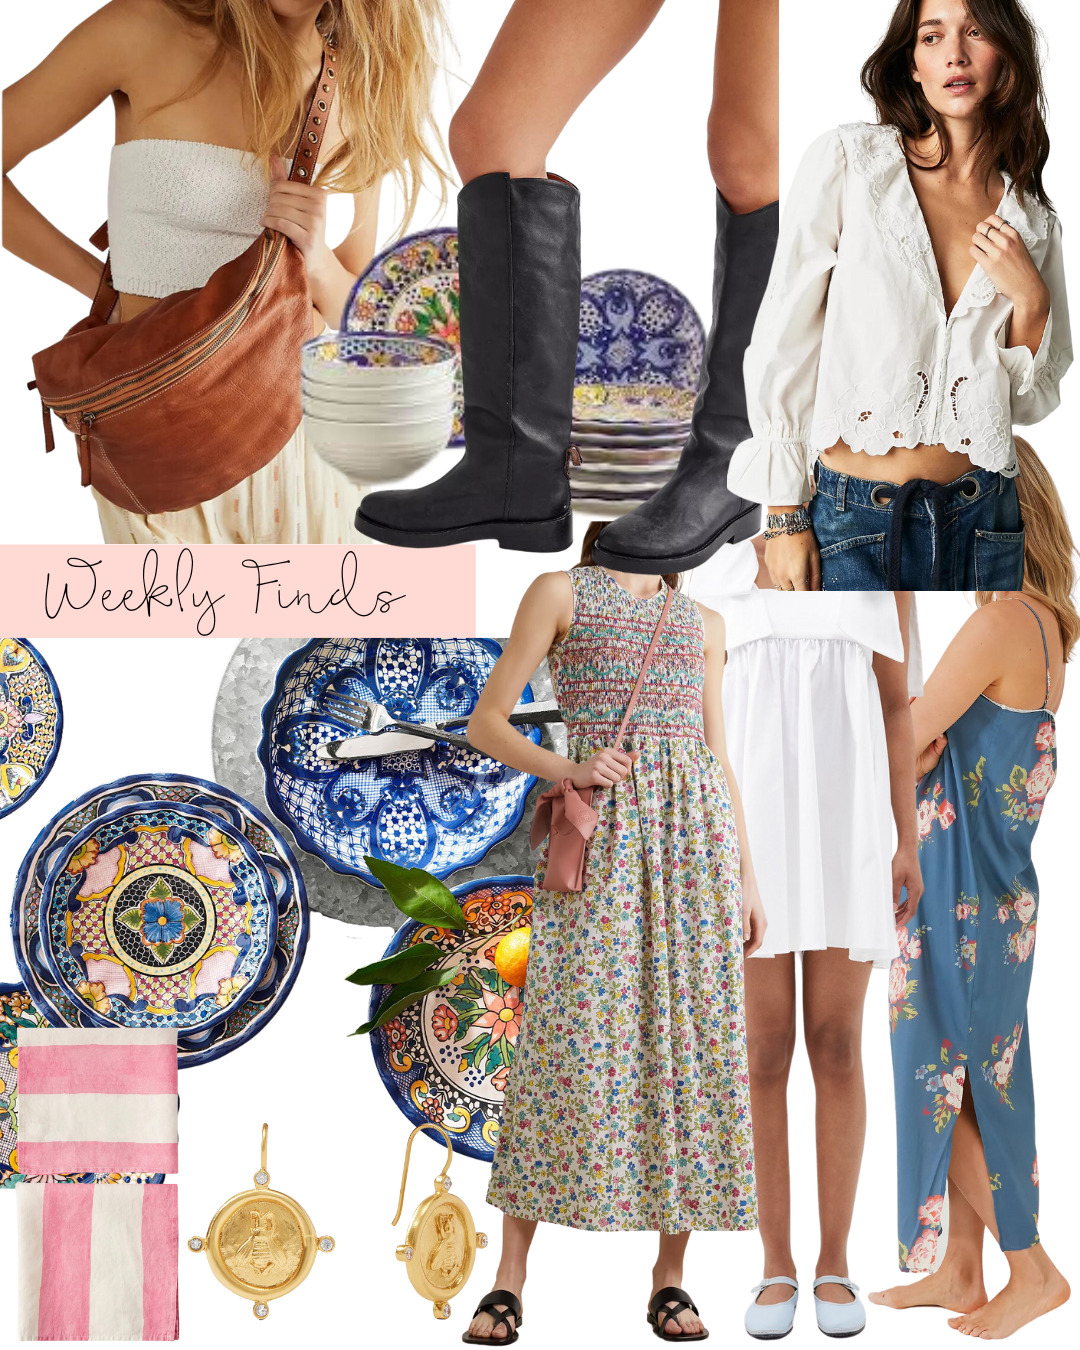 Weekly Finds to Take You From Spring to Summer